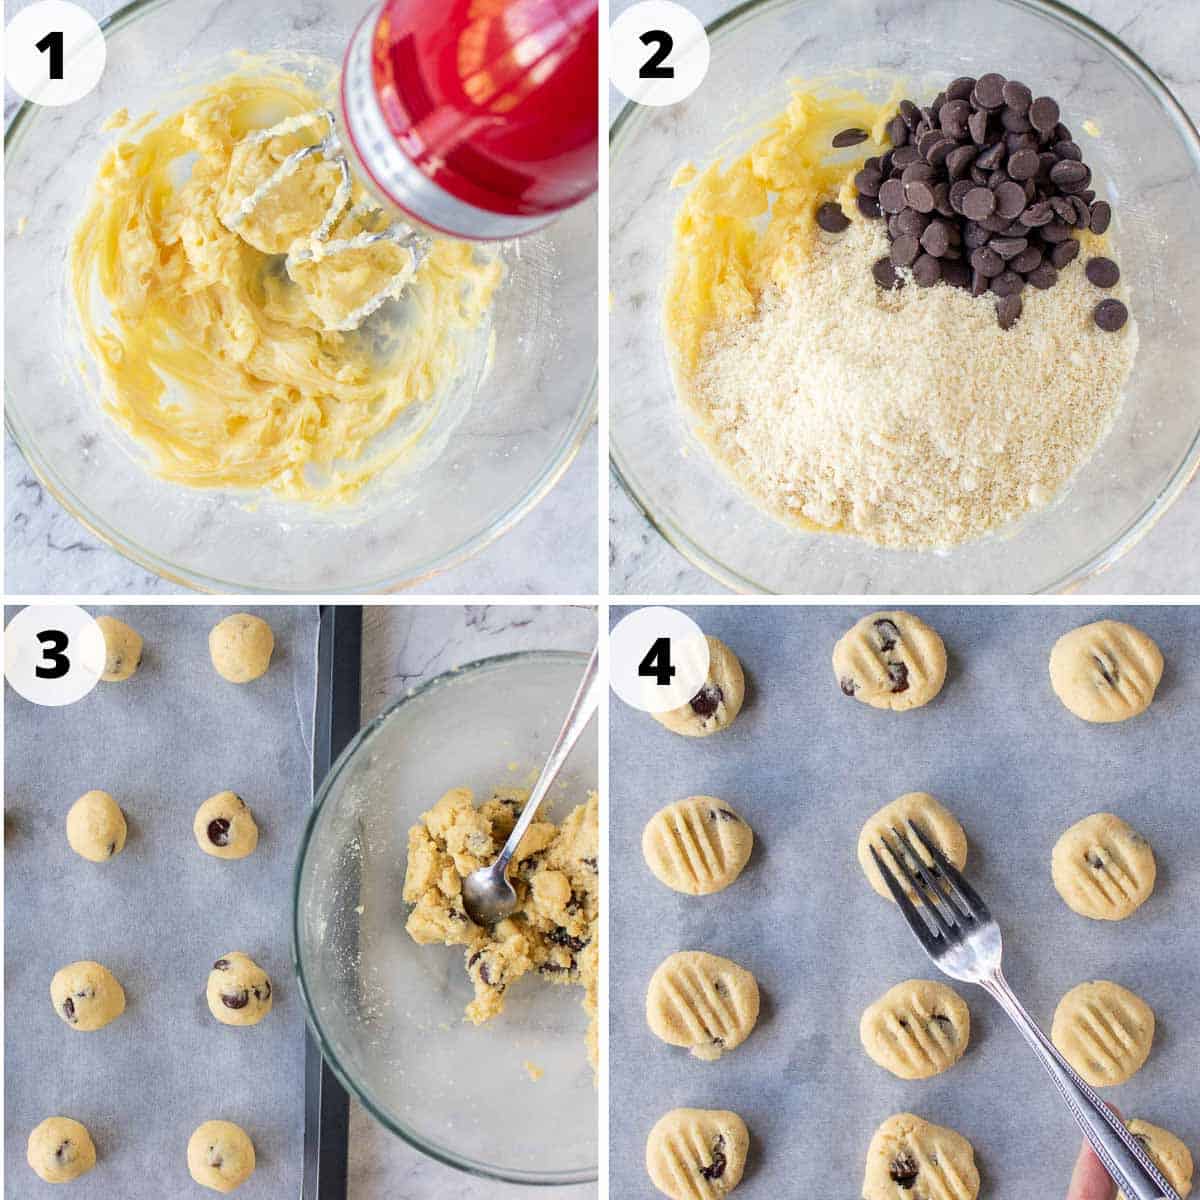 A collage of 4 images showing the step by step process to make the recipe.